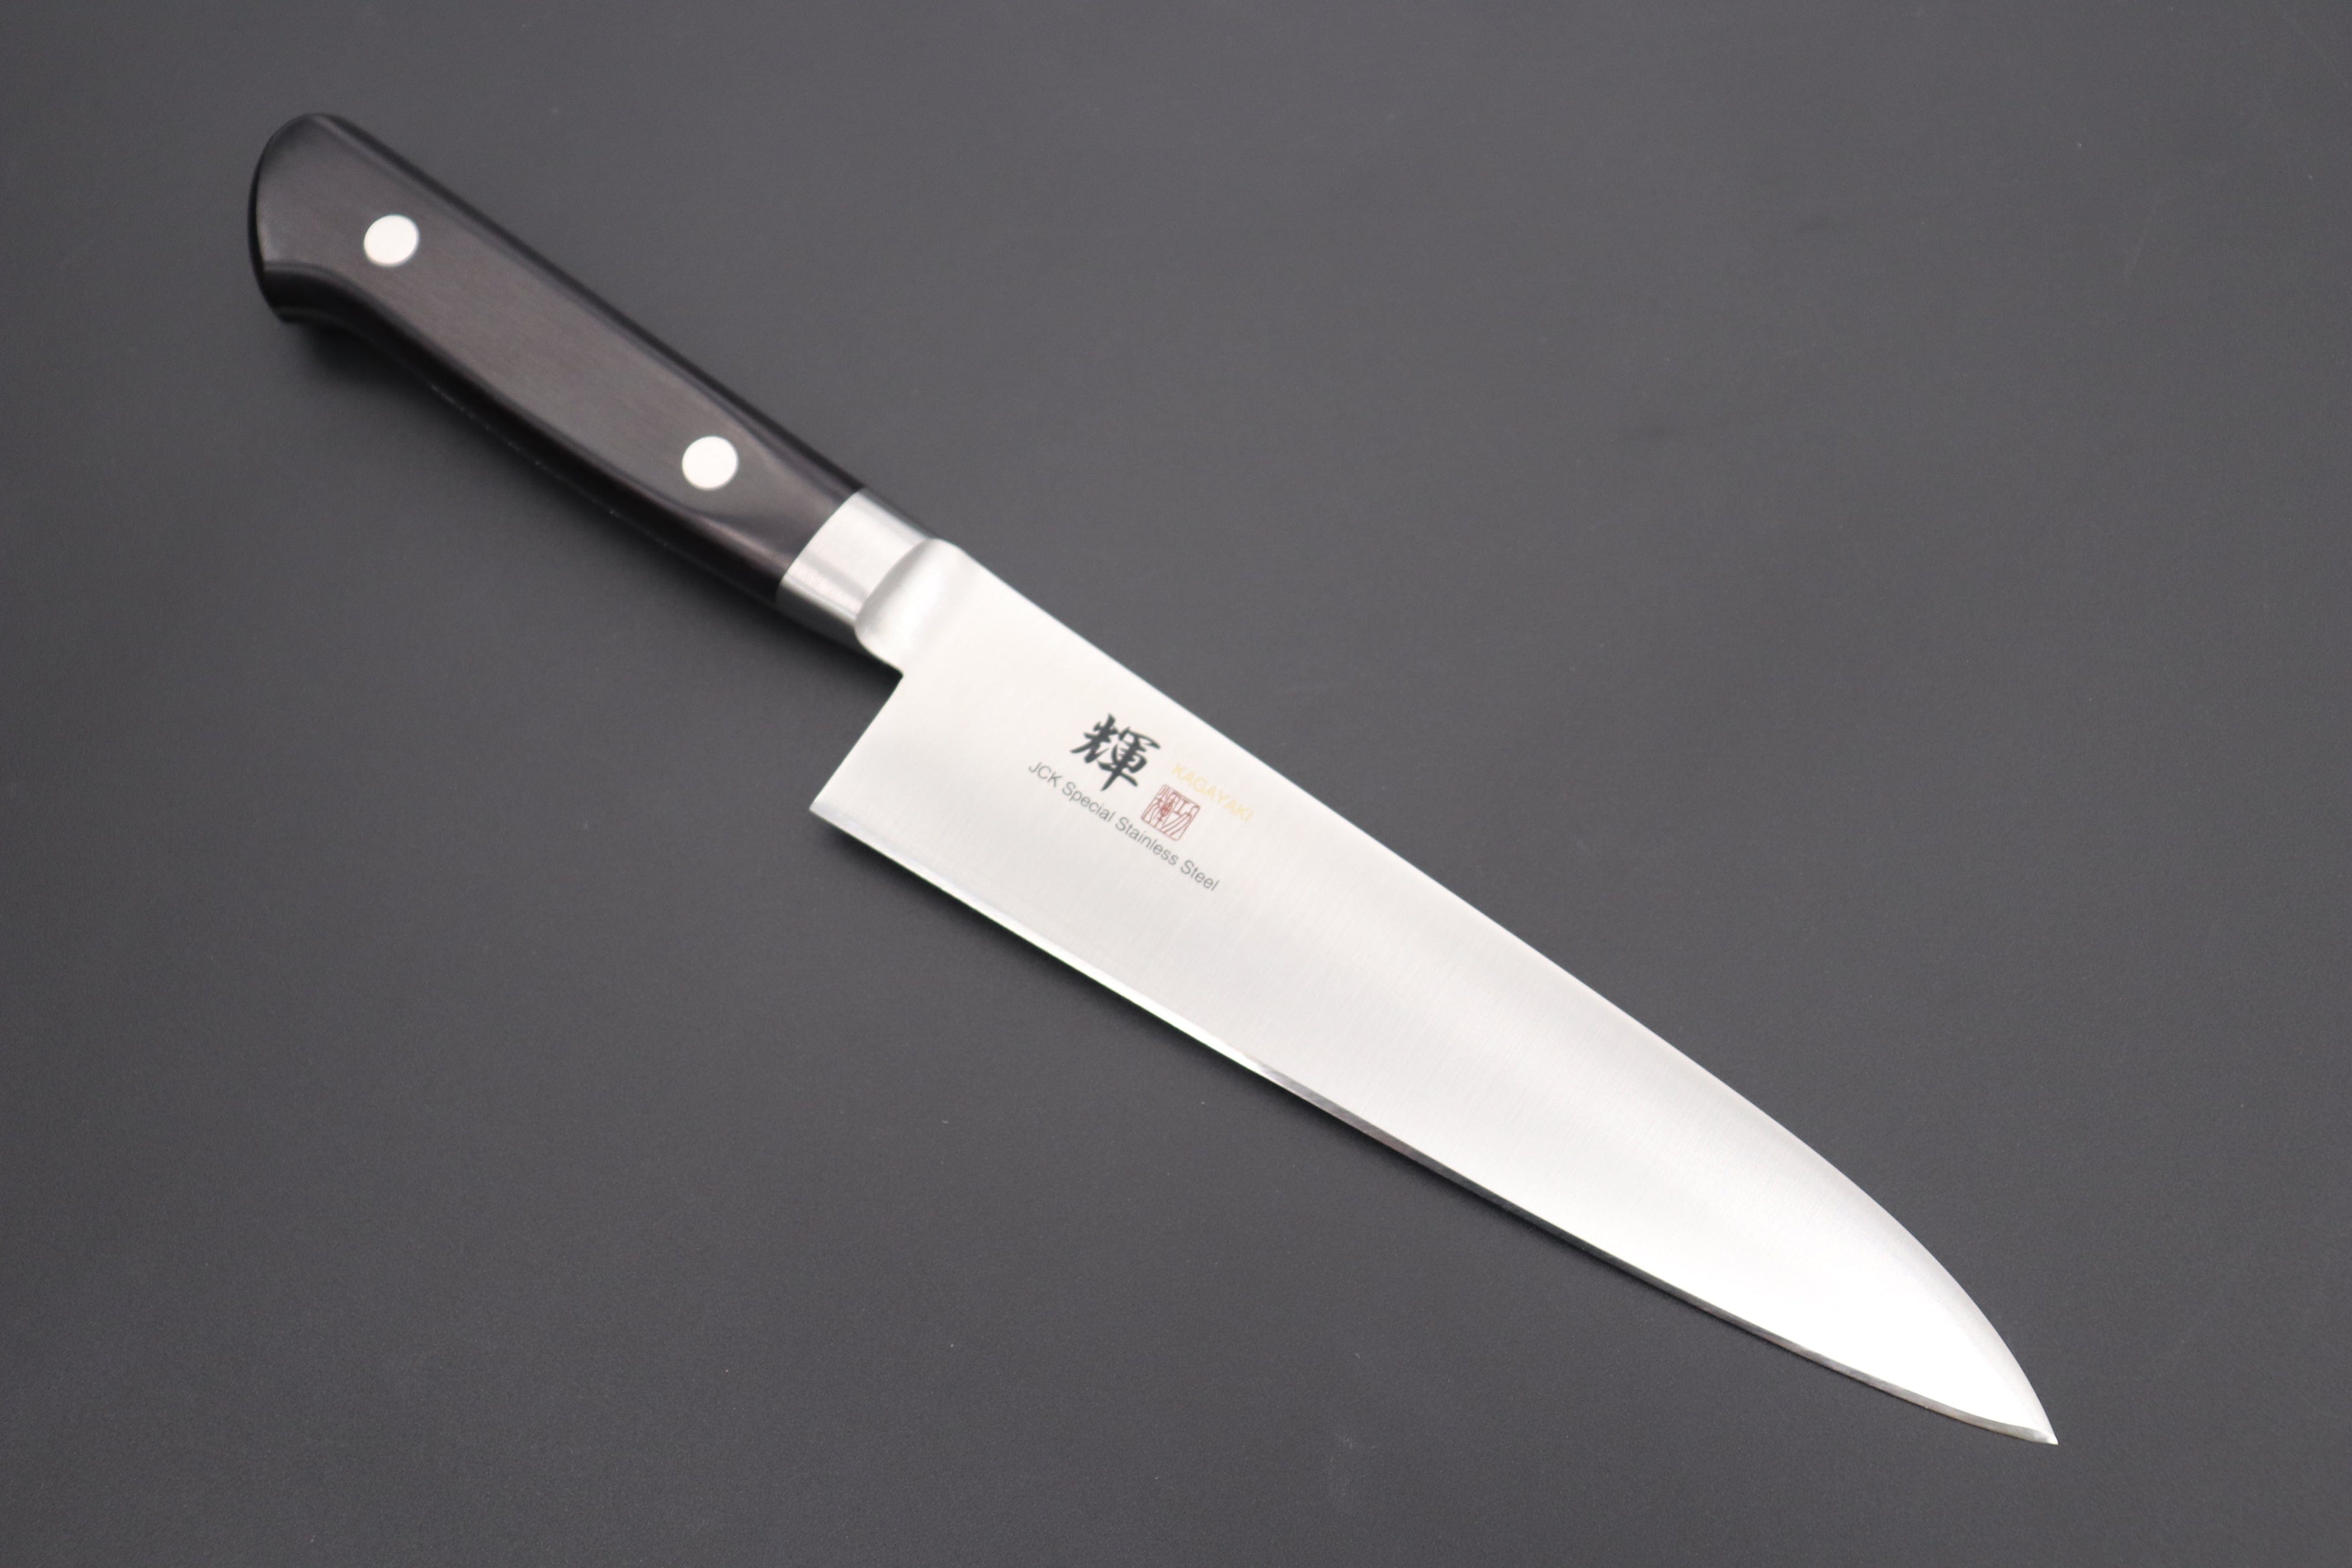 7-Inch Stainless Steel Butcher Knife, 1 Piece